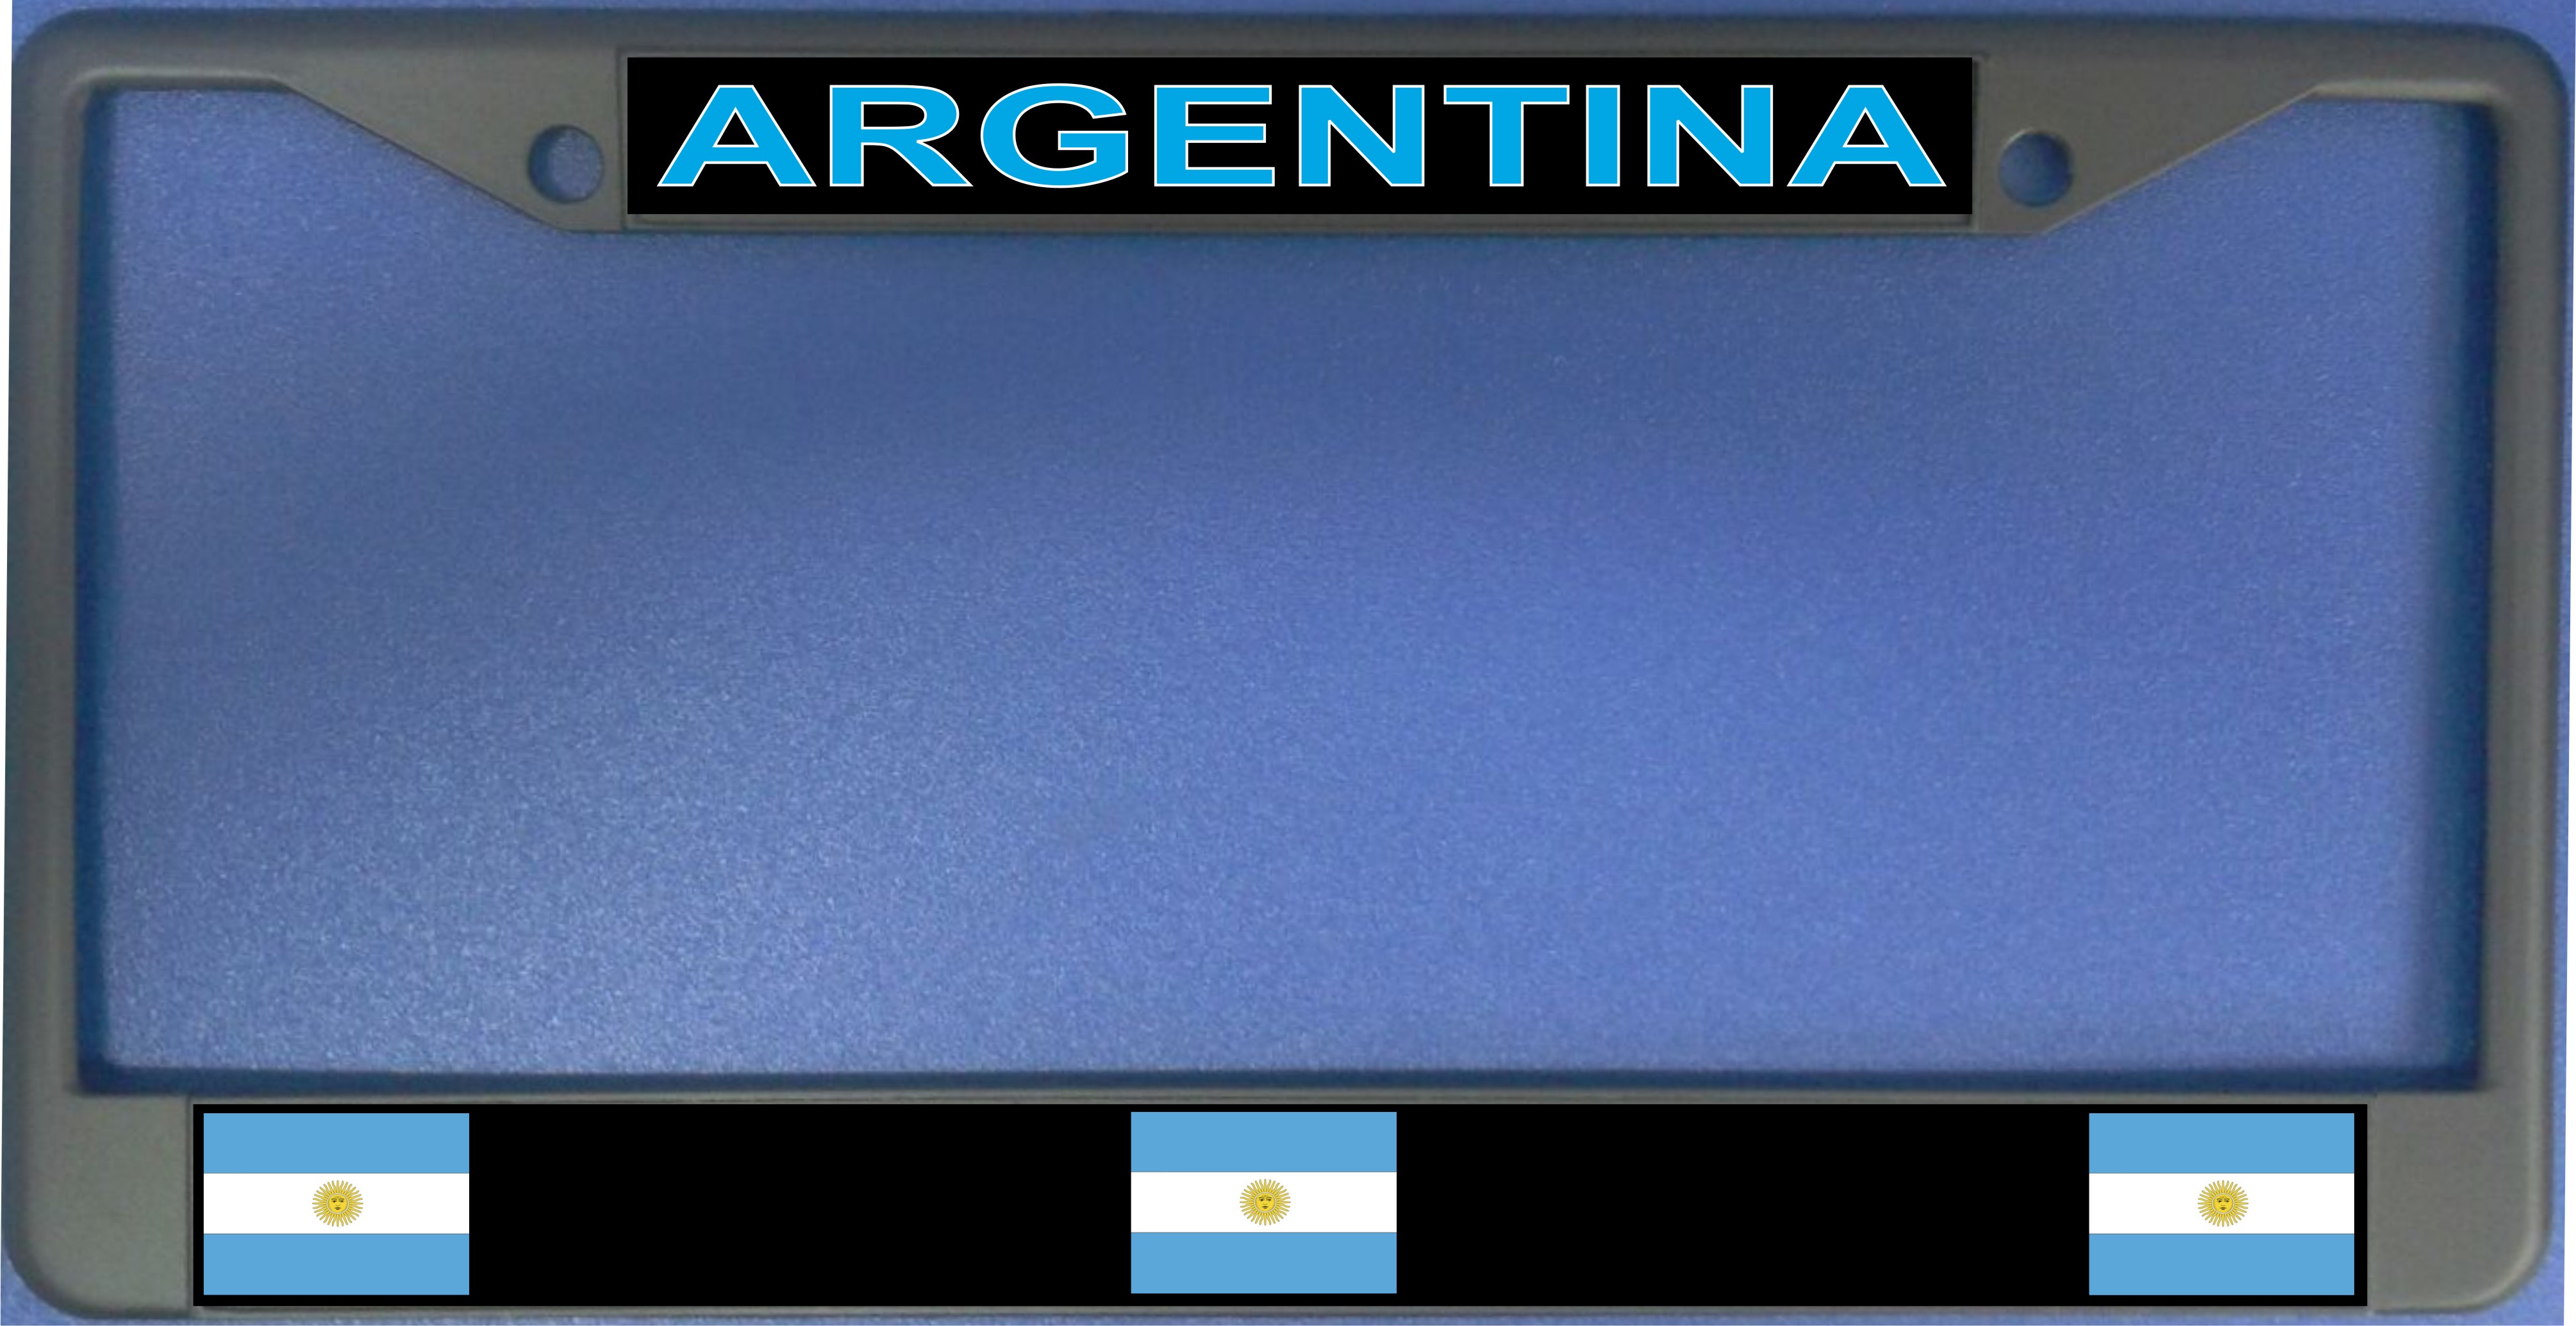 Argentina FLAG Photo License Plate Frame  Free Screw Caps with this Frame